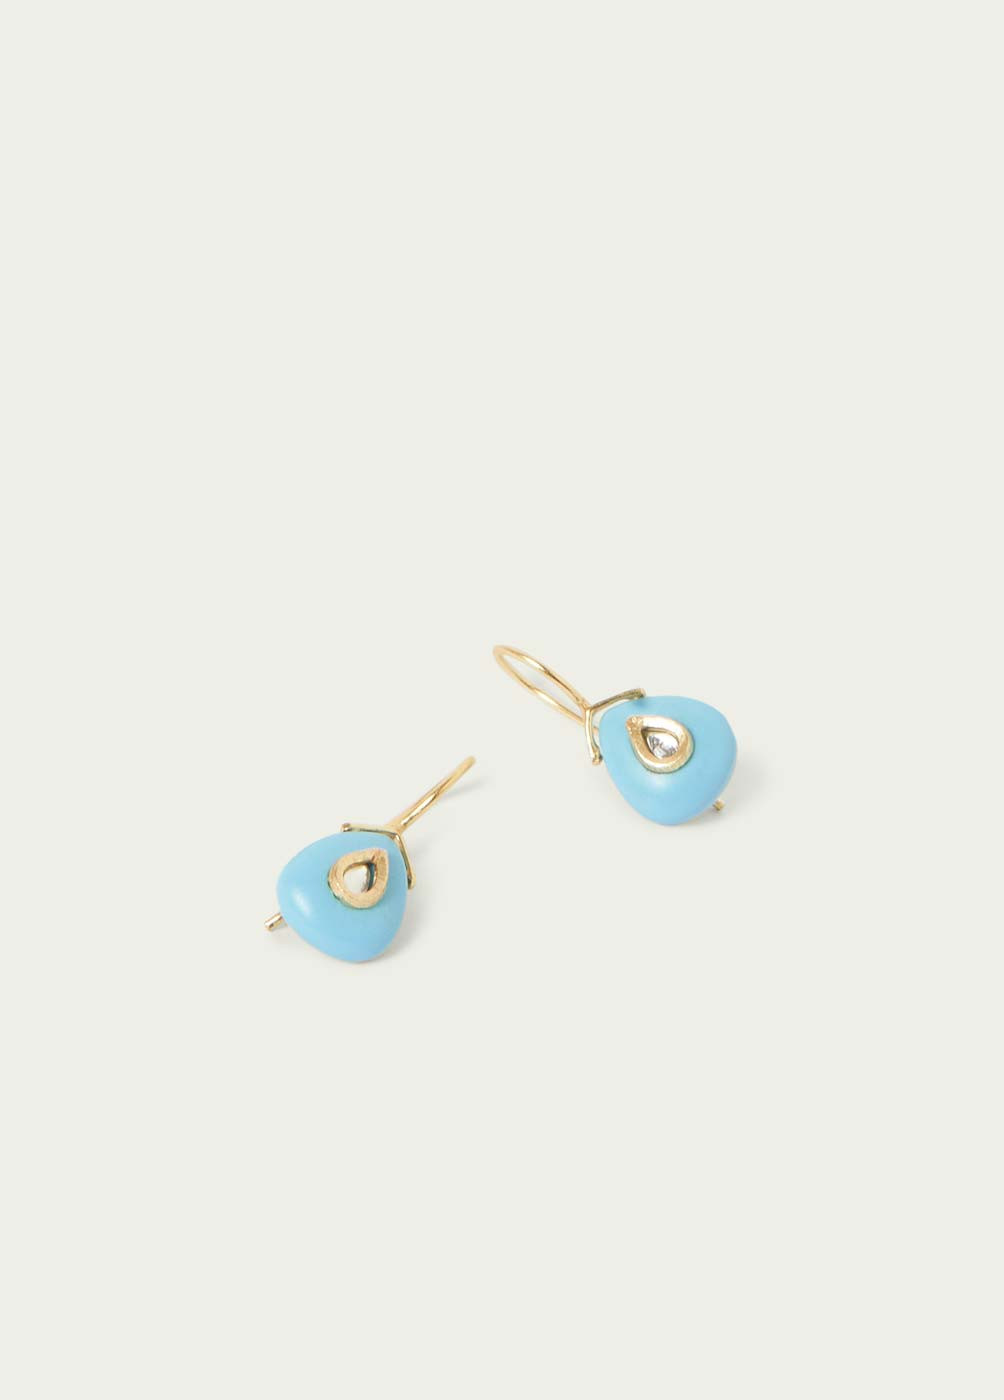 DROP EARRINGS WITH TURQUOISE PEAR